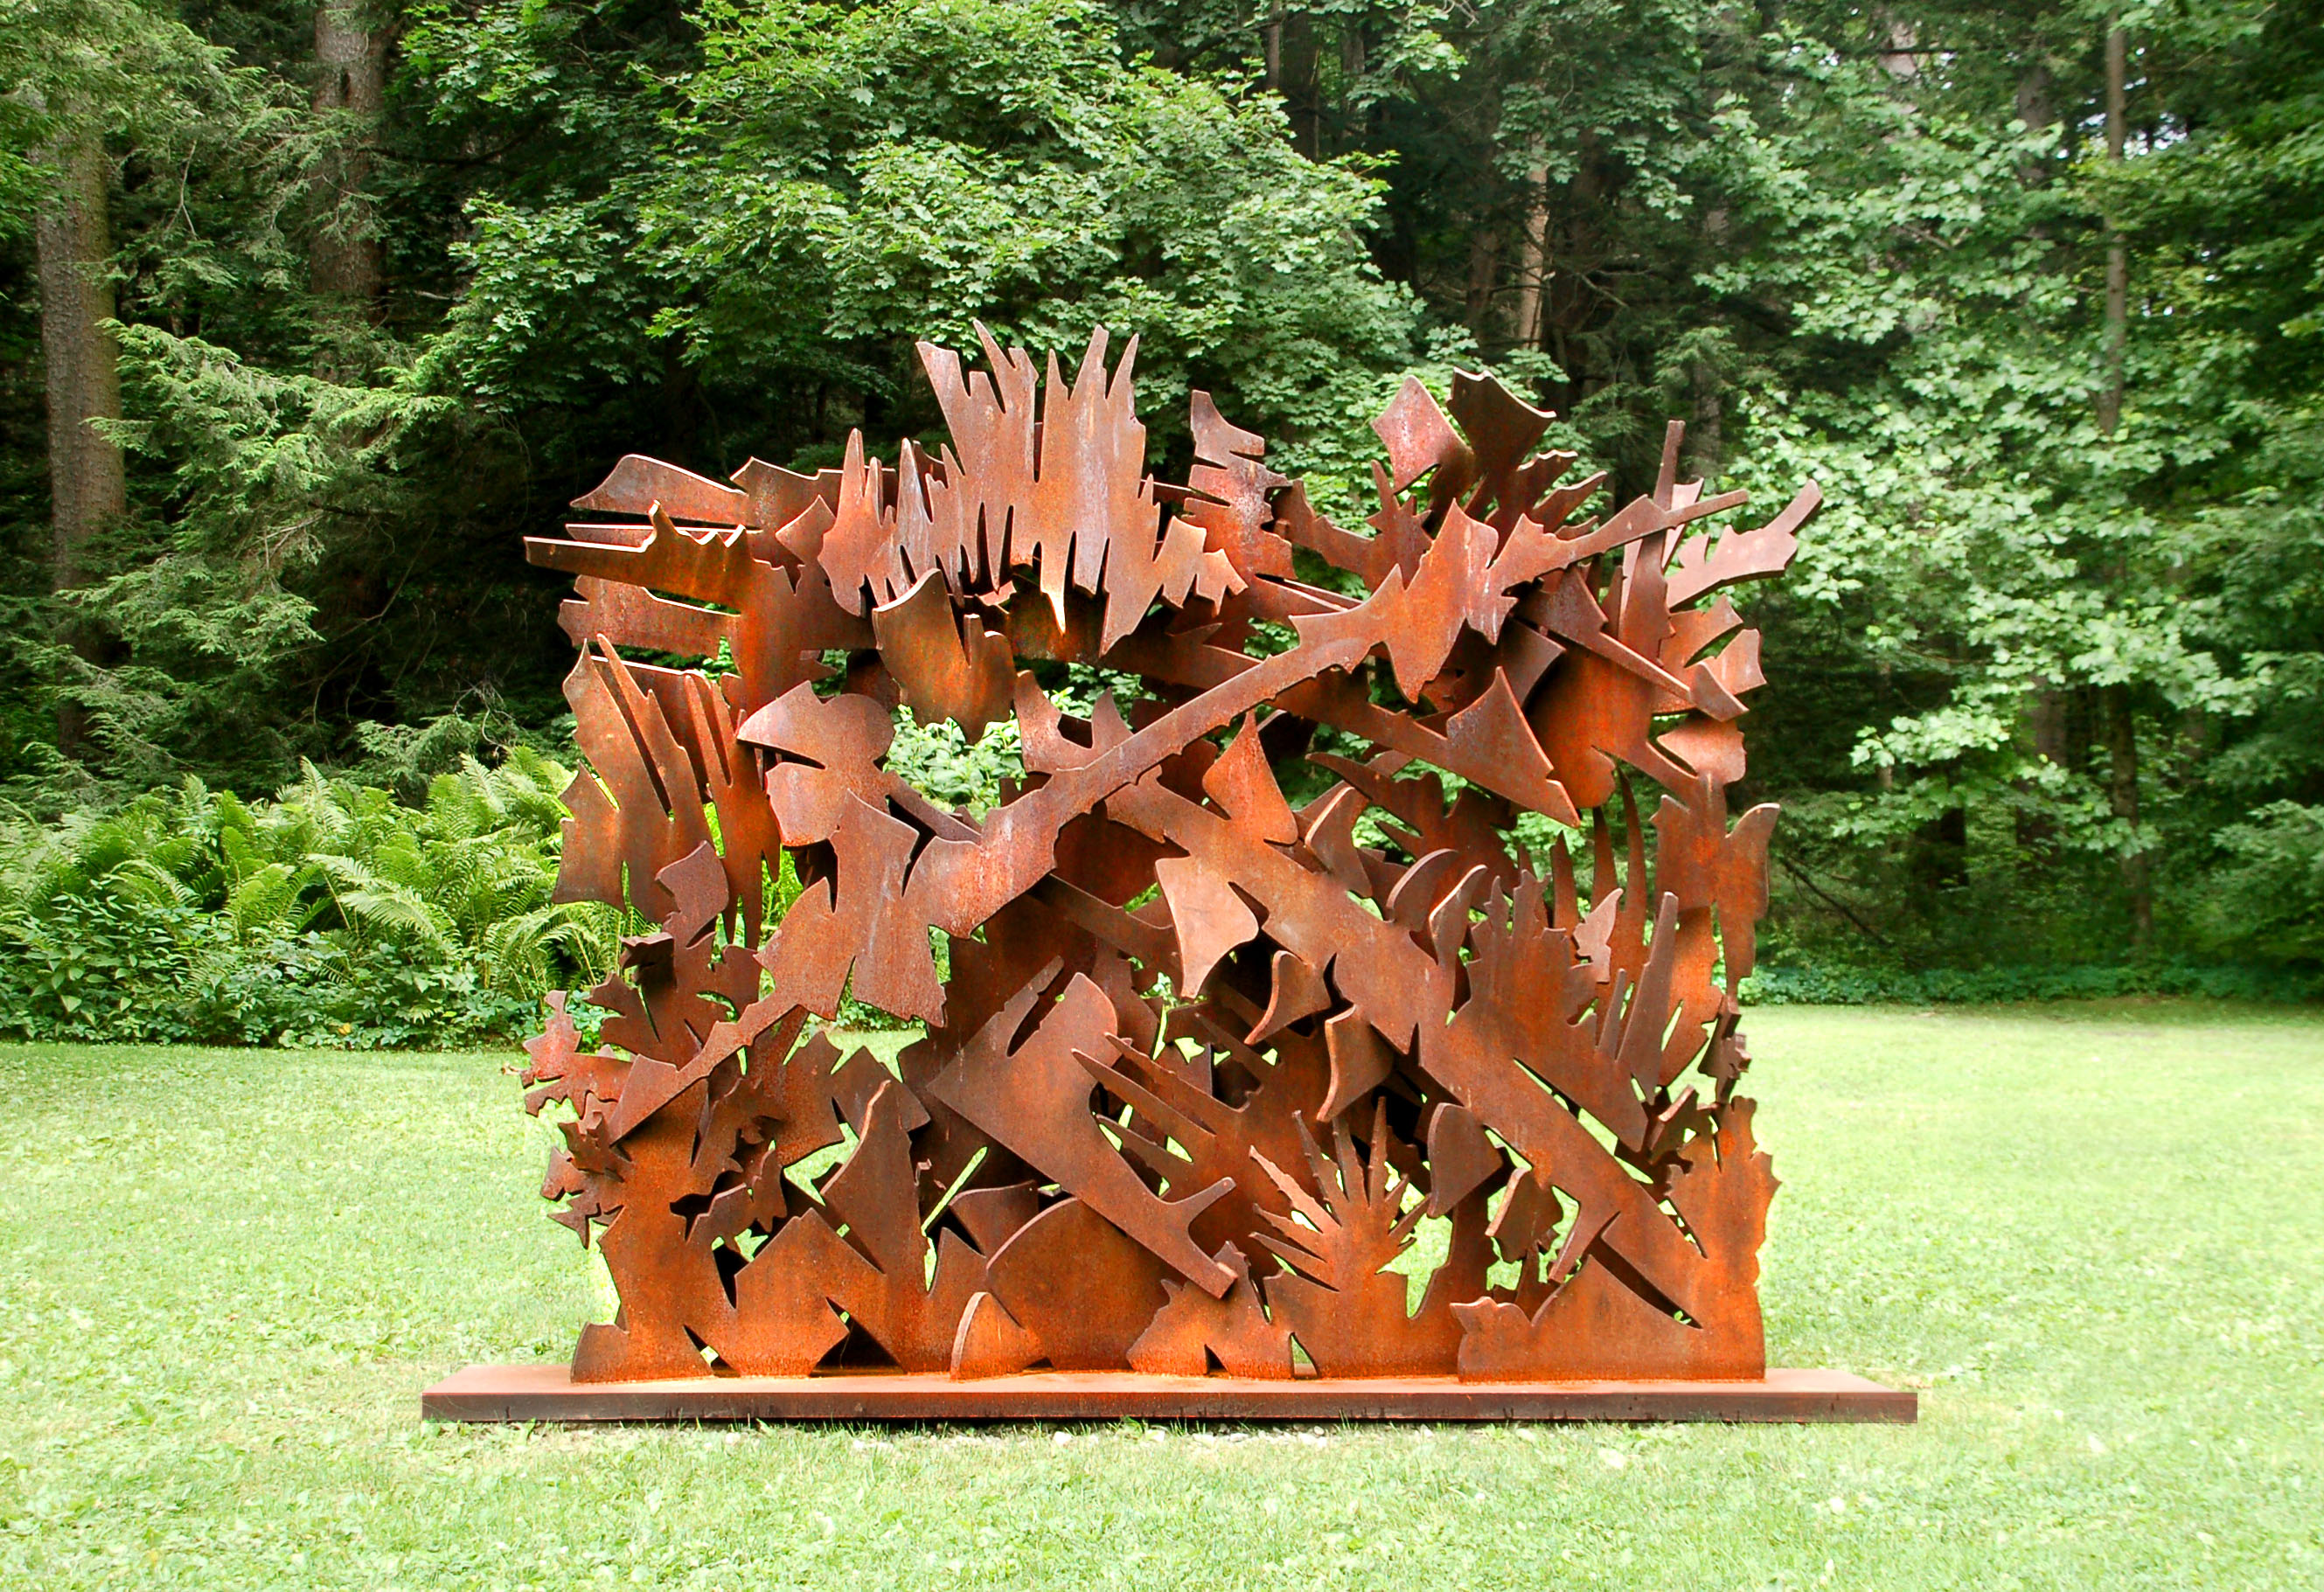 Albert Paley - Interlace, 2003, weathering steel, 91.5 x 120 x 25.5 inches